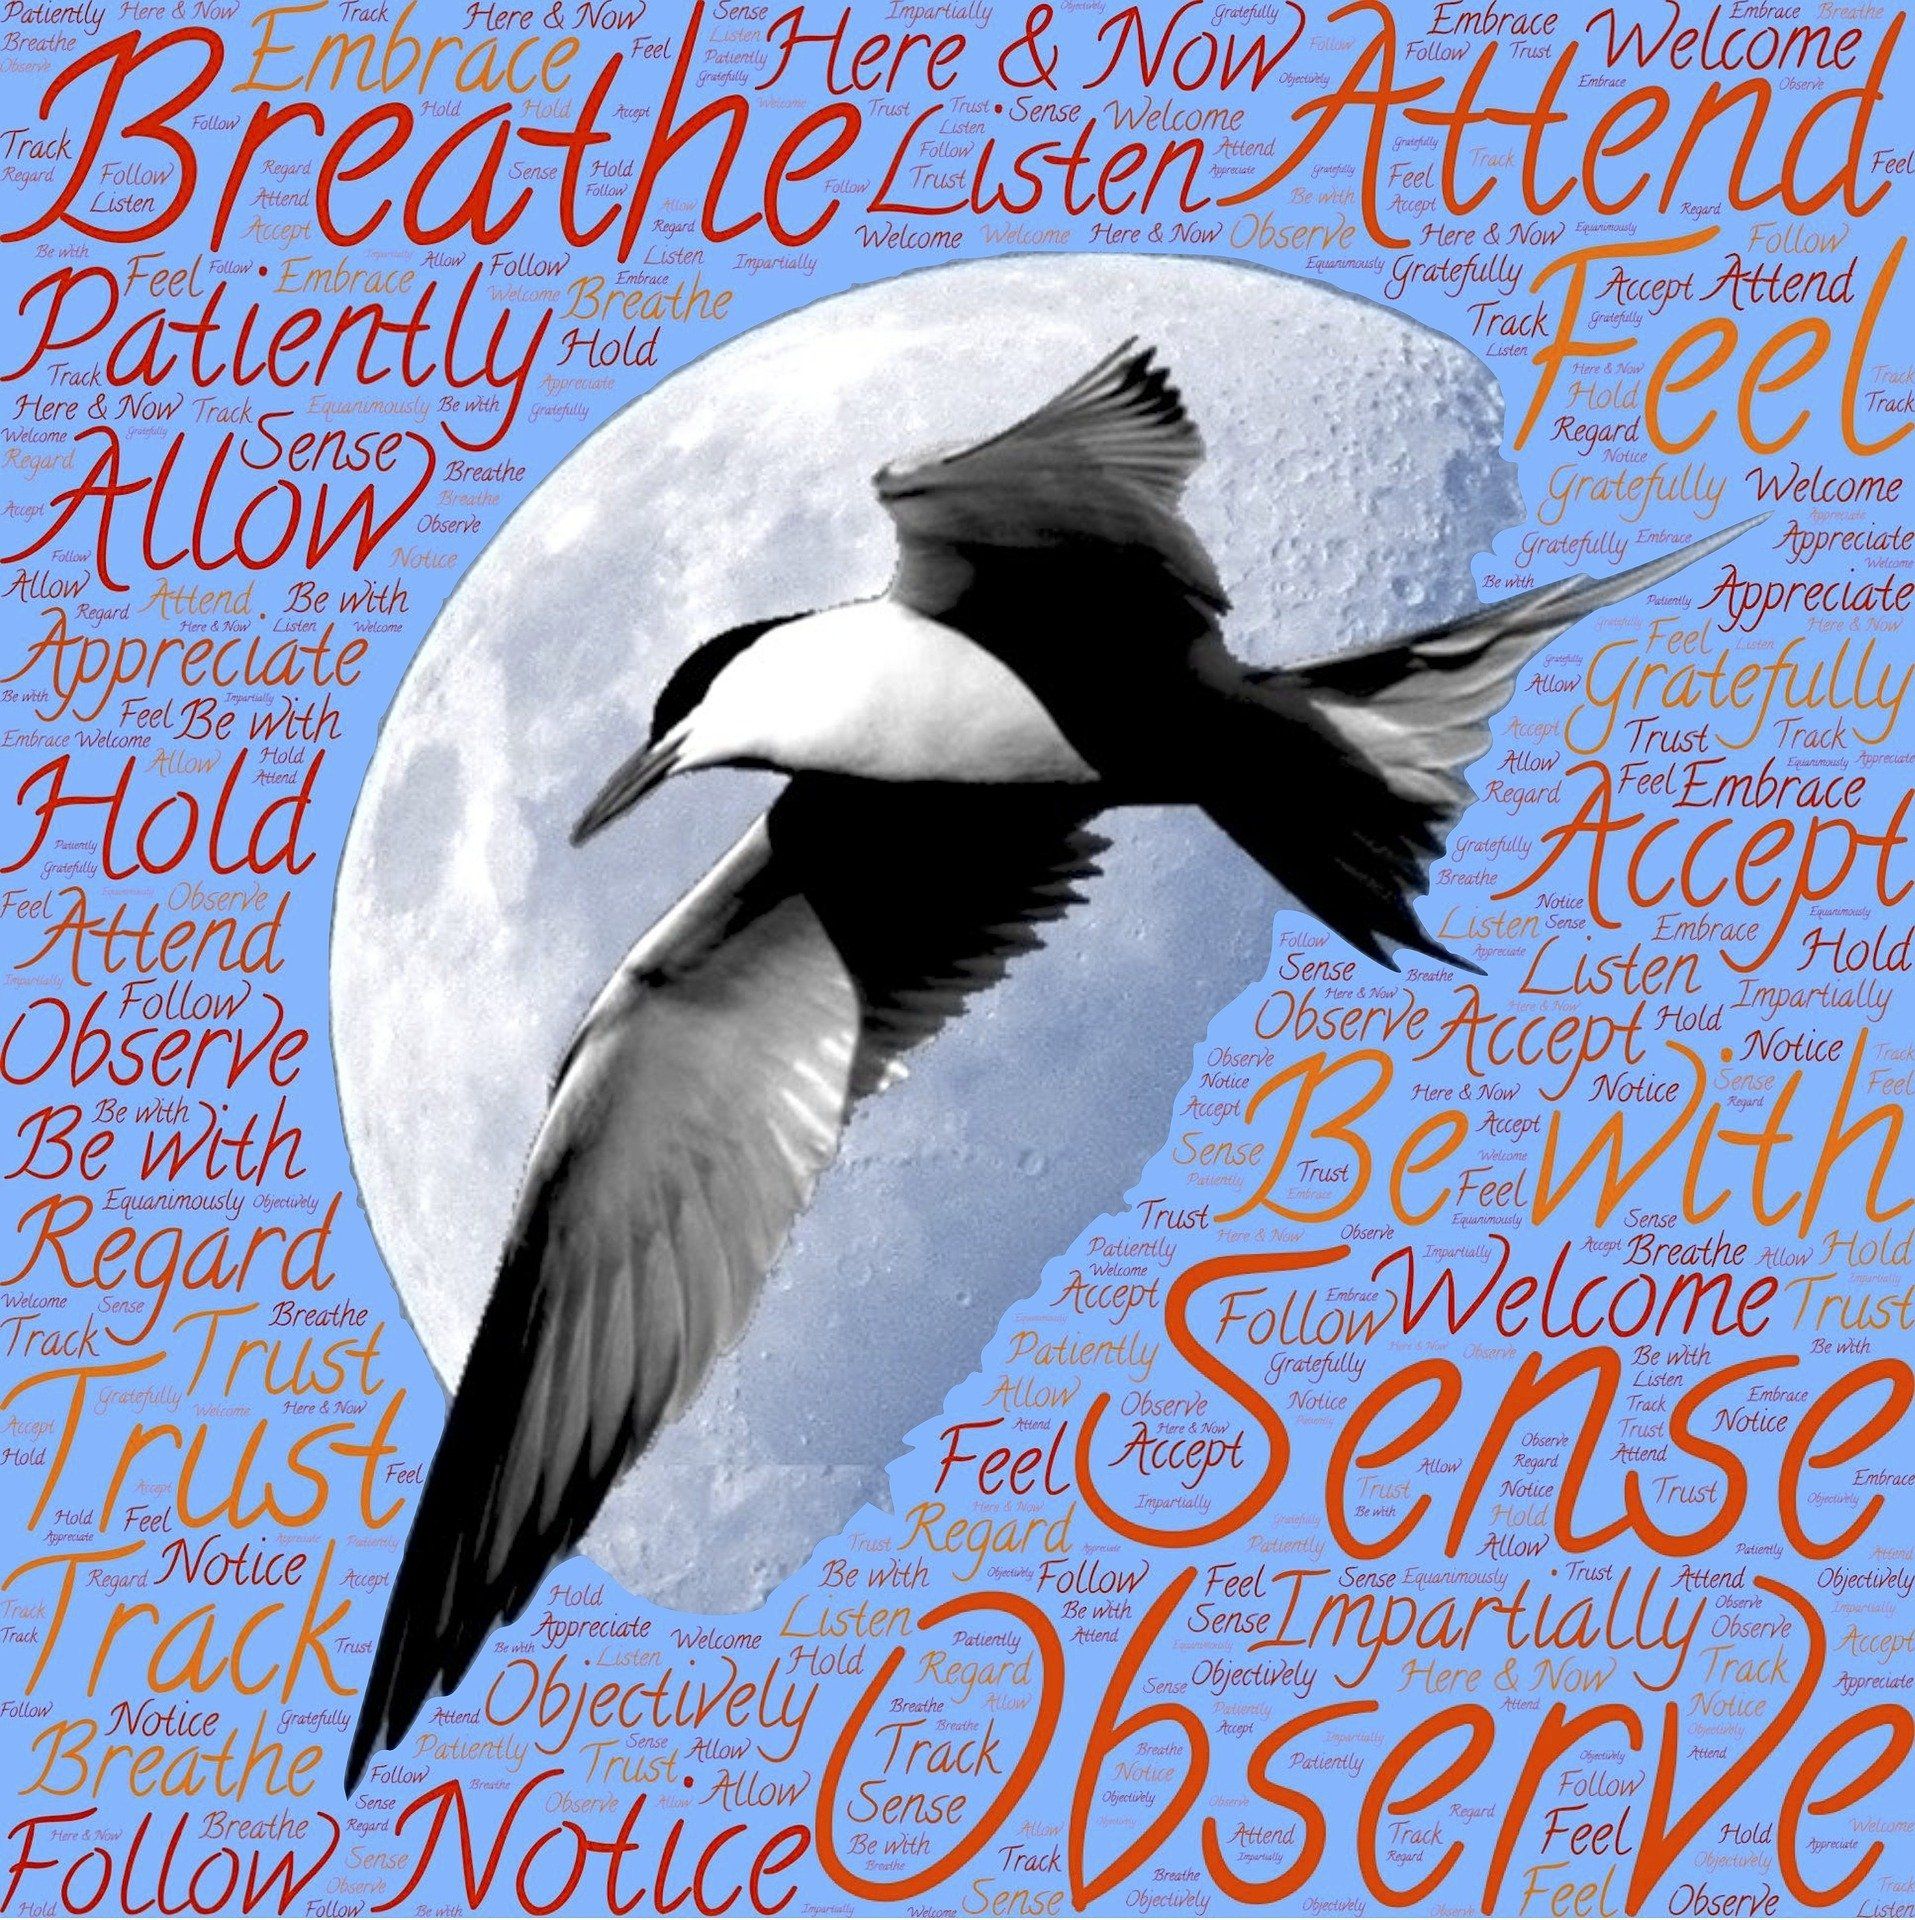 Boho Silver Sea Glass Jewellery 'about us' blog. Mental health positive words surrounding a moon and bird.